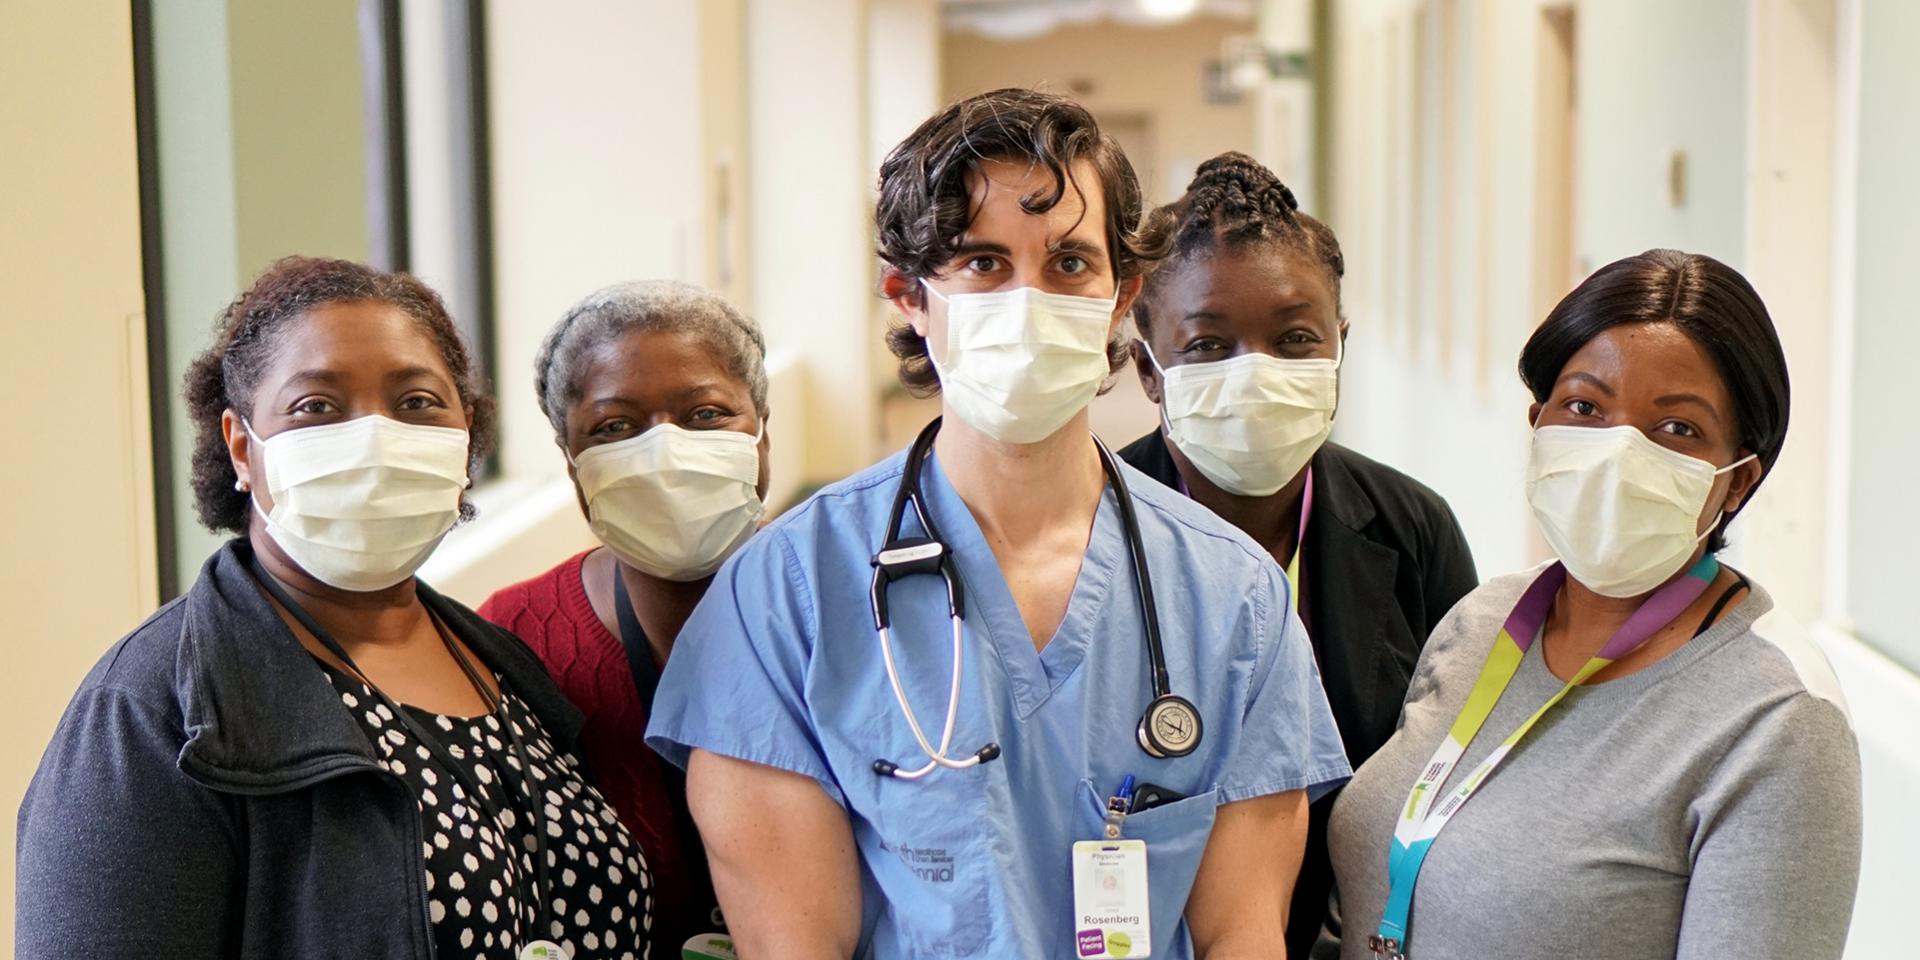 Dr. Jarred Rosenberg with nurses from the Nurse Led Outreach Team: Nicole, Yvonne, Theresa and Siphathokuhle (Pat)